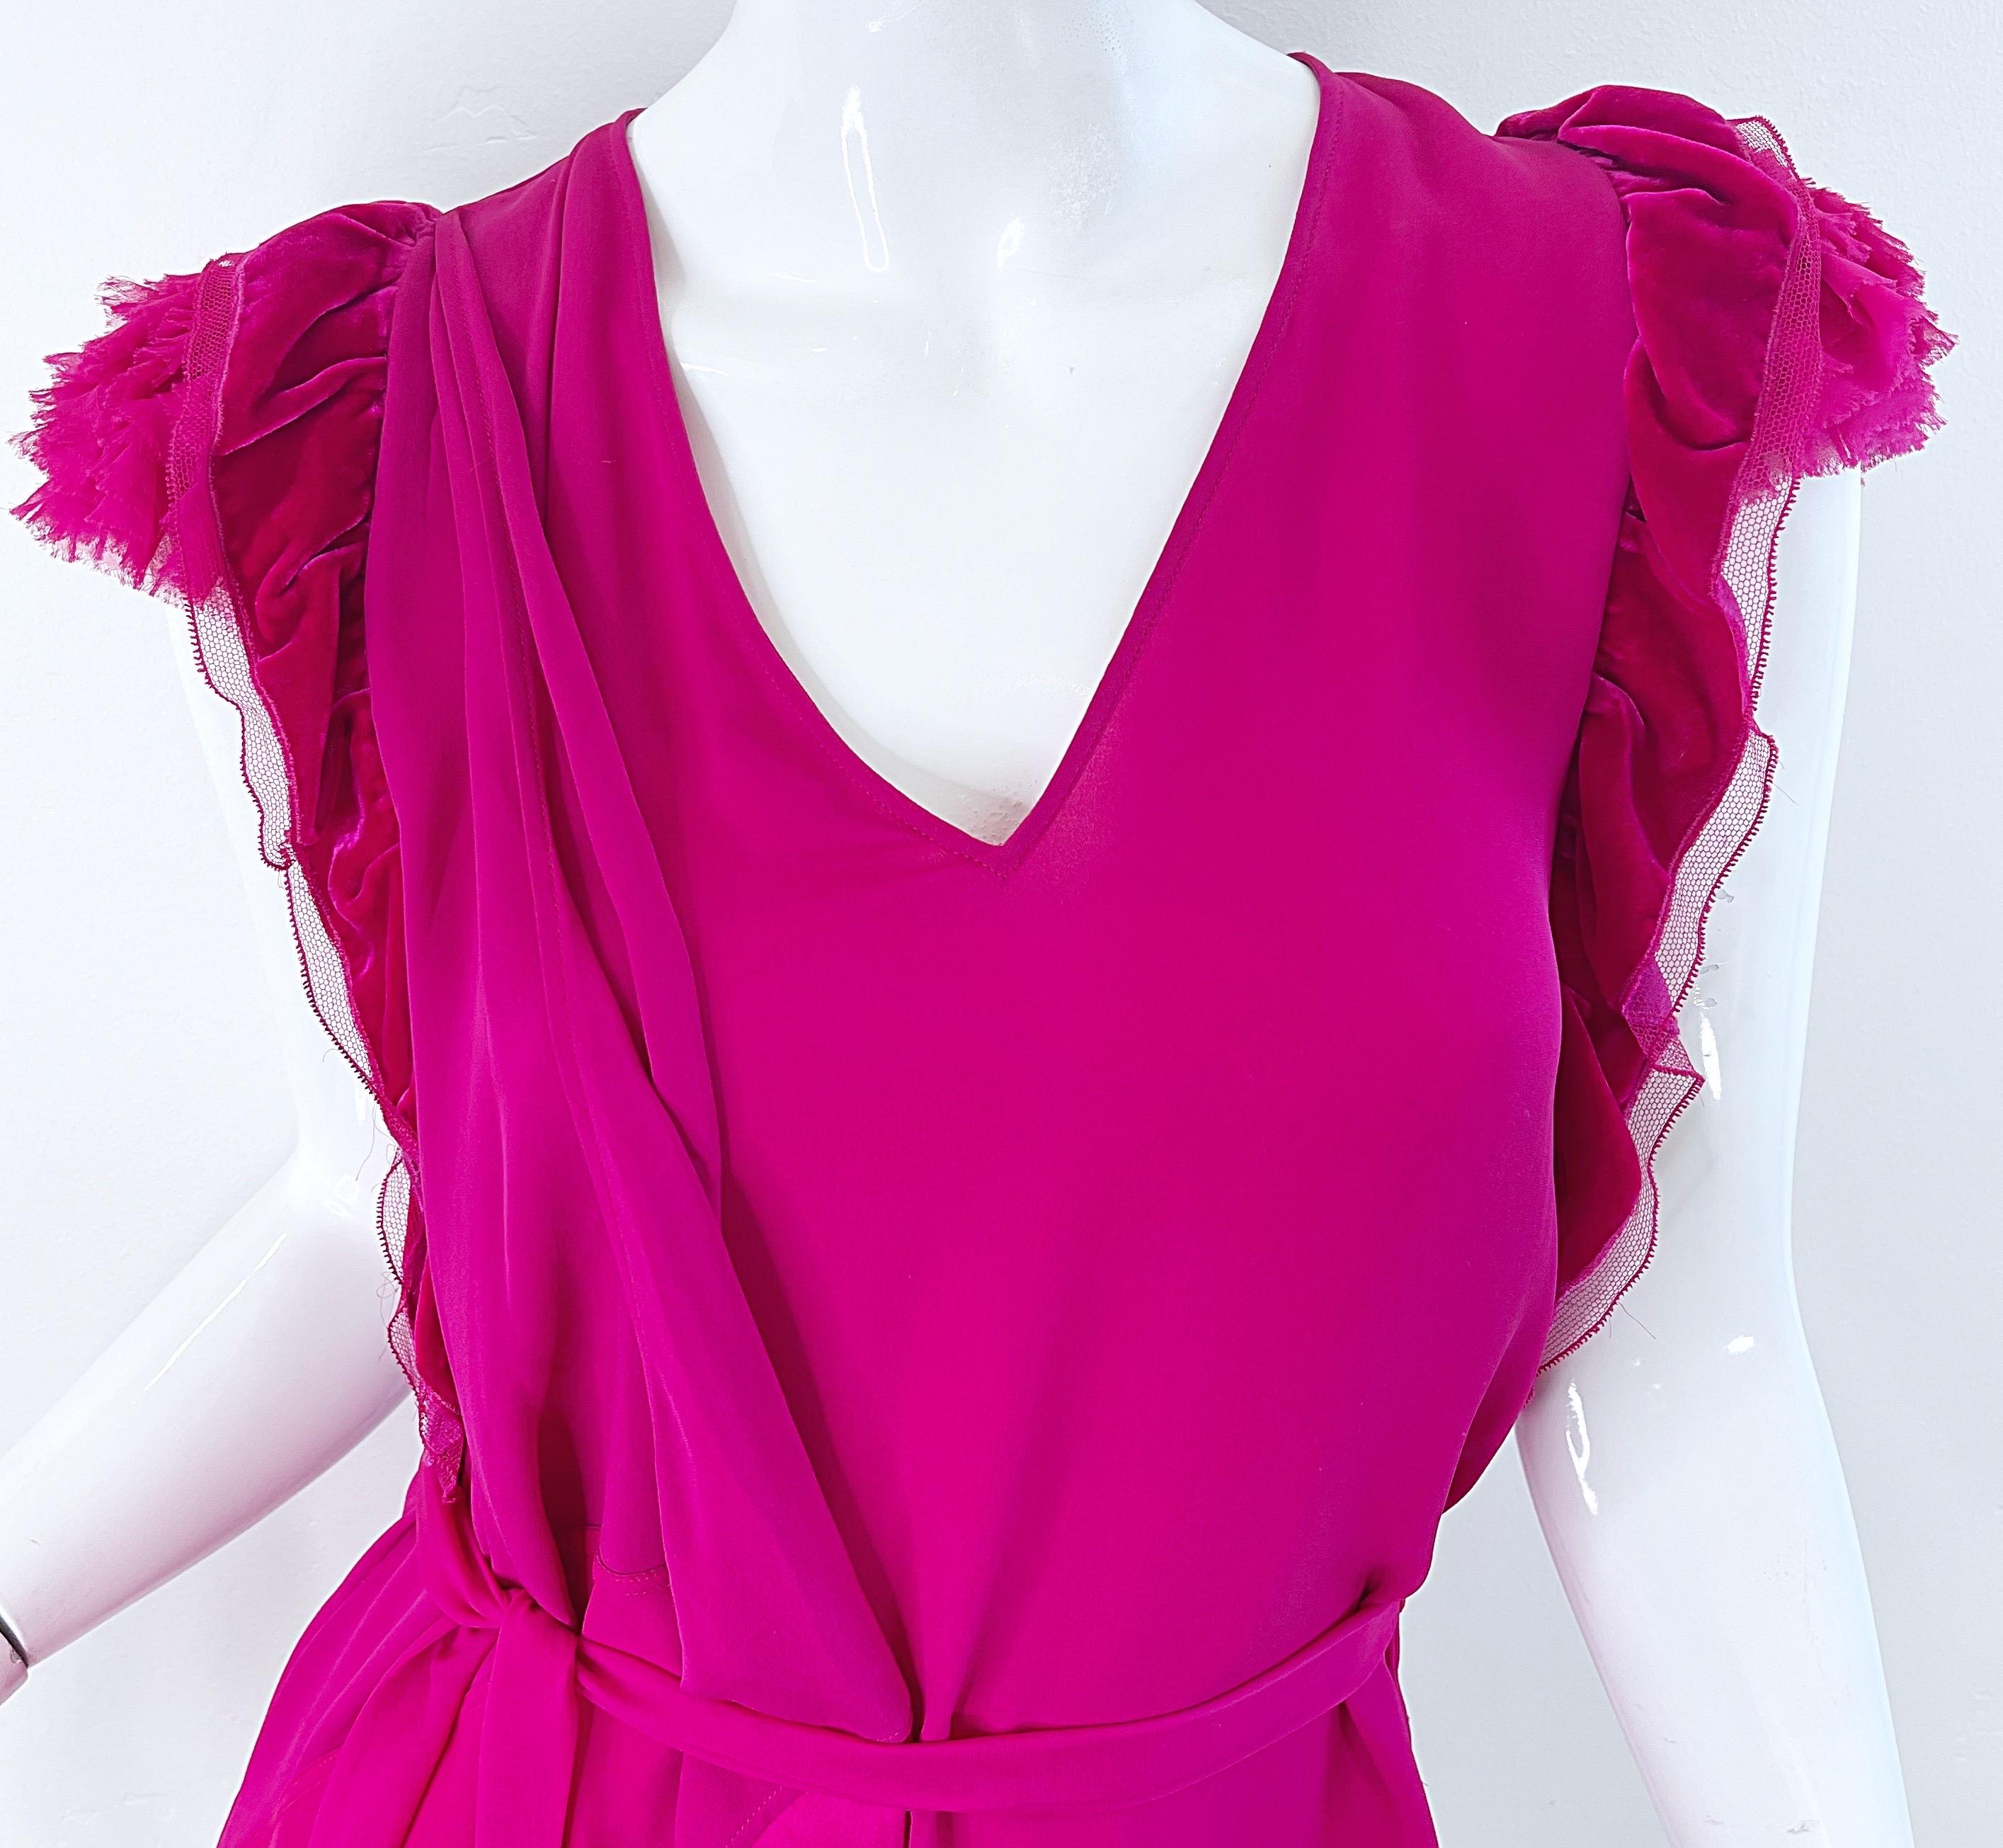 NWT Givenchy Spring 2020 Size 34 / 2 - 4 Hot Pink Fuchsia Silk Belted Blouse Top For Sale 6